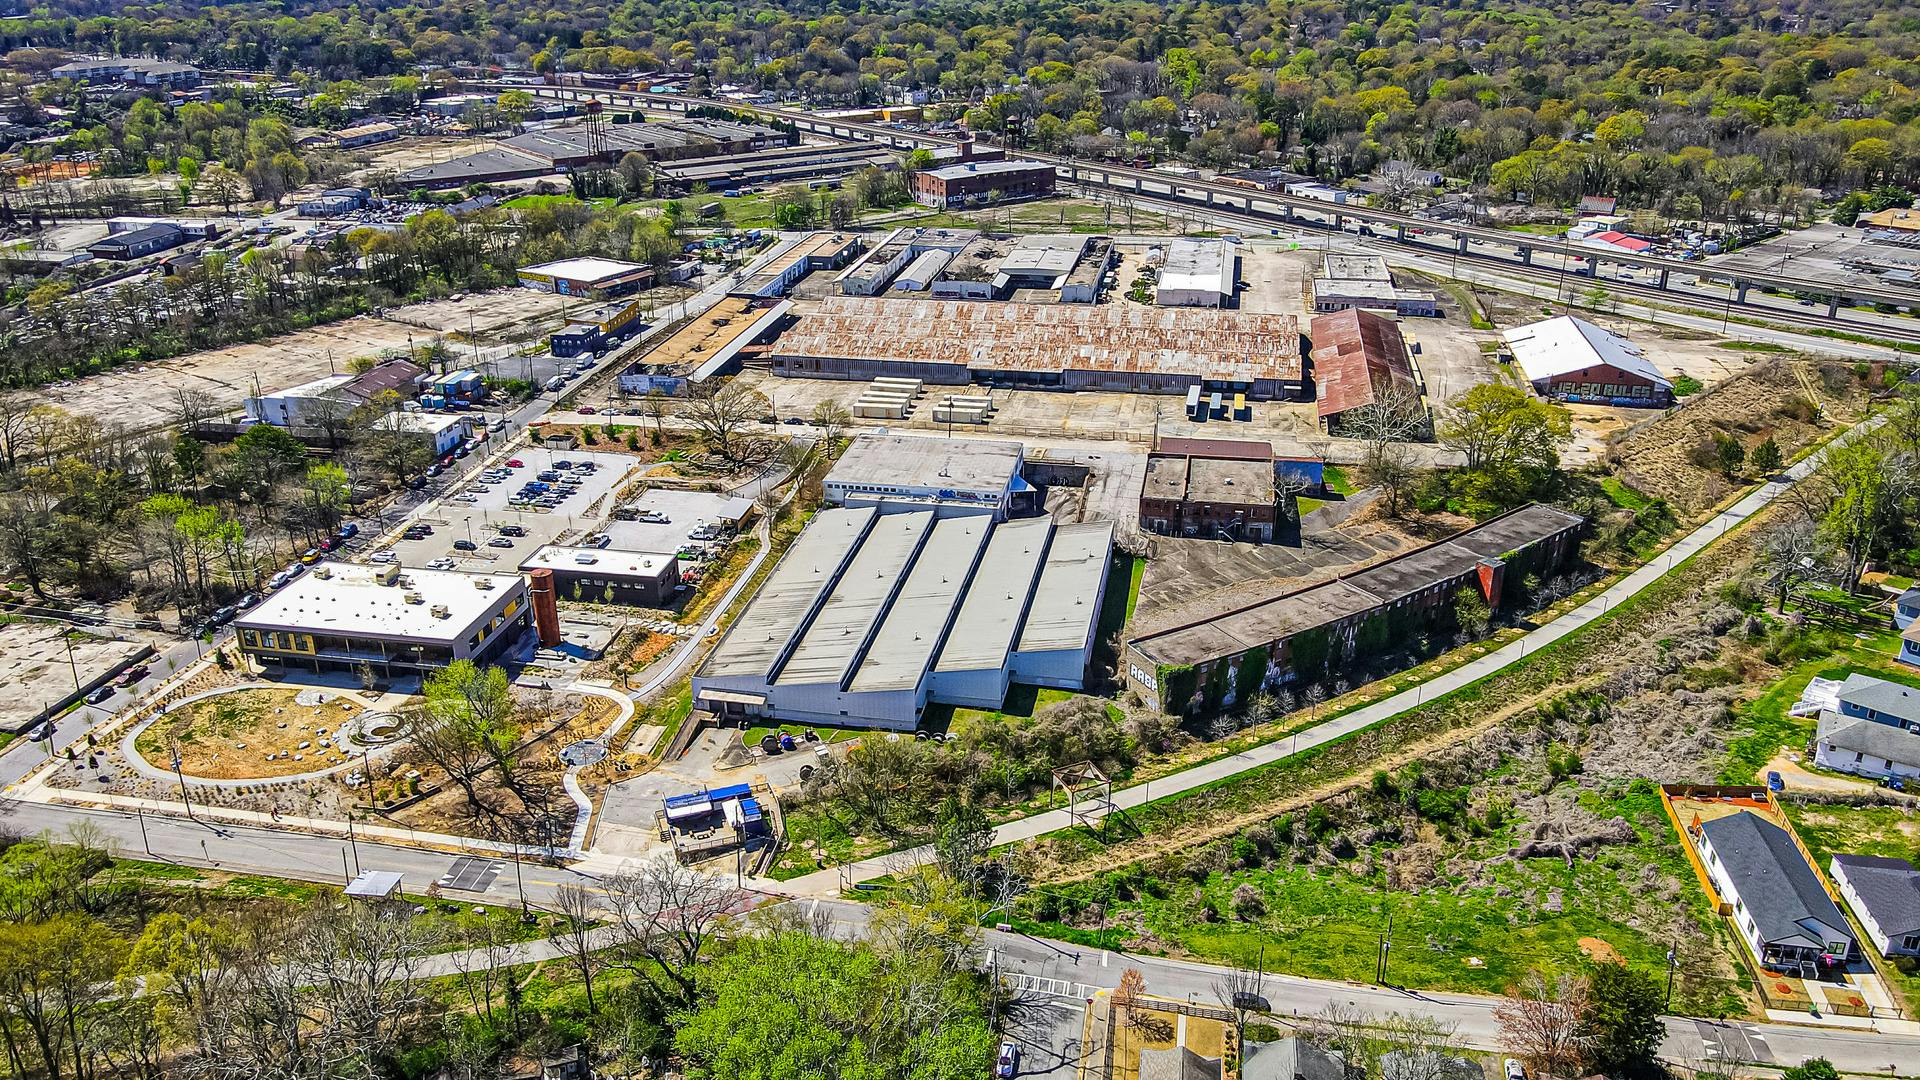 Bird's eye view of warehouse and industrial park showing buildings and parking areas adjacent to the Westside Trail.